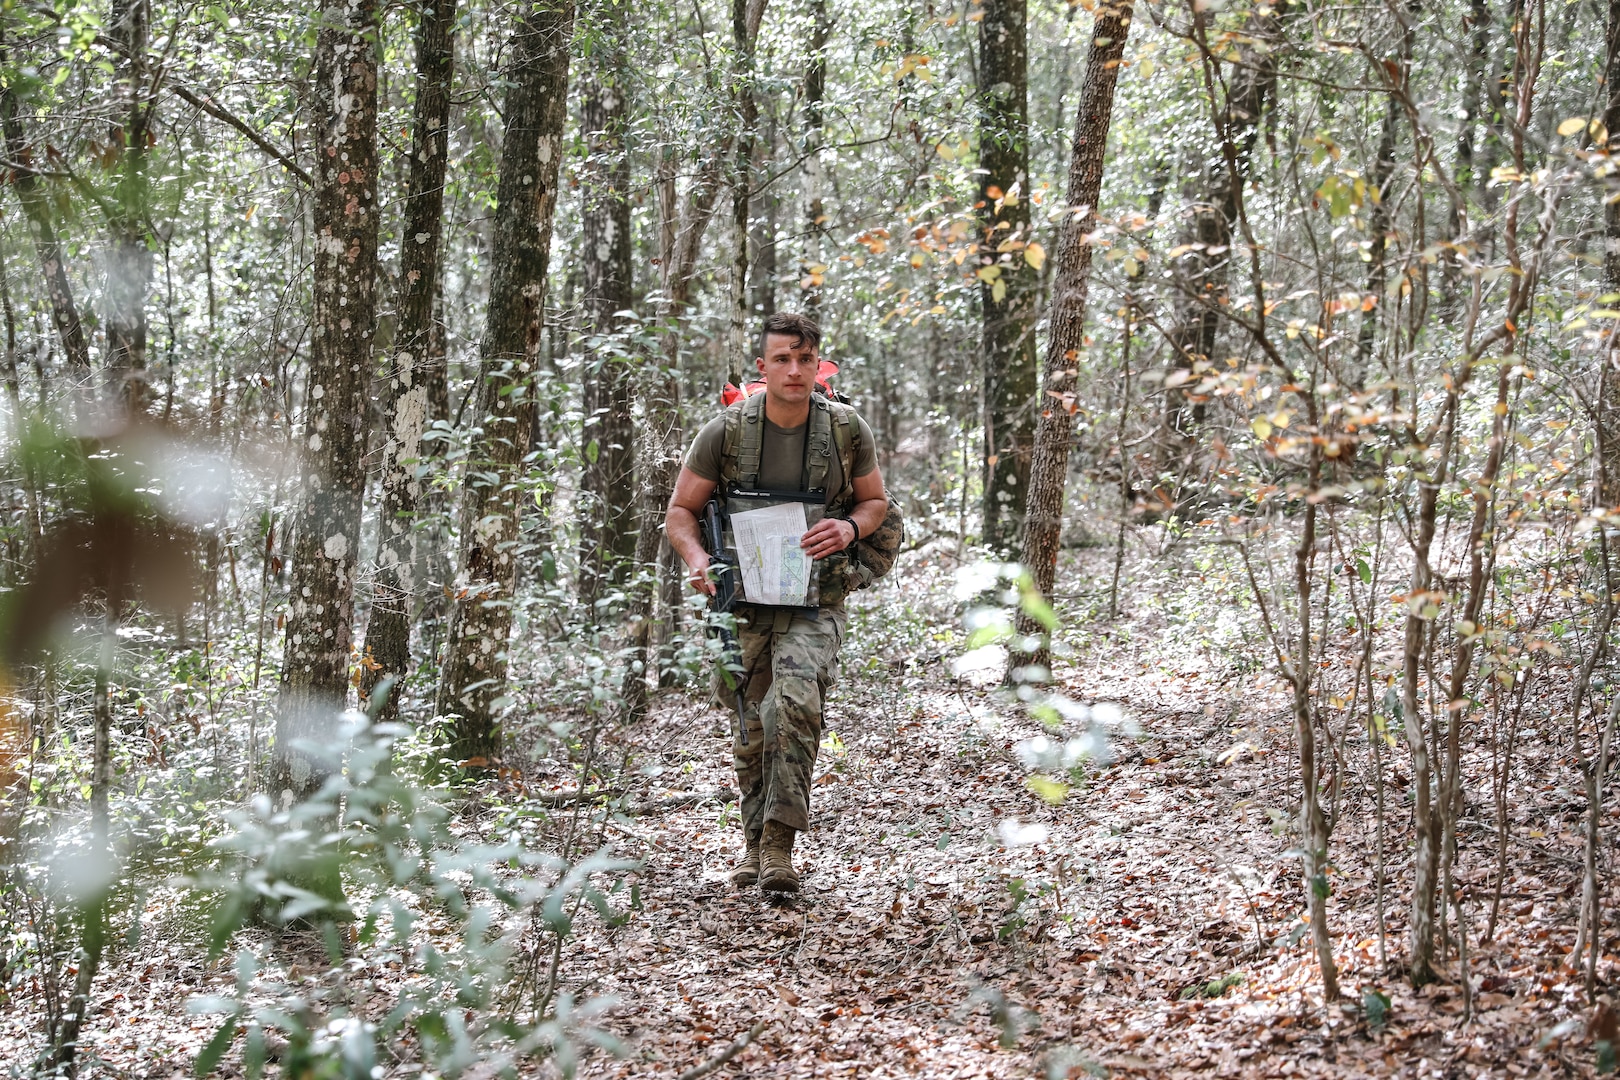 3/20th holds Special Forces Conditioning and Preparation at Camp Blanding Joint Training Center